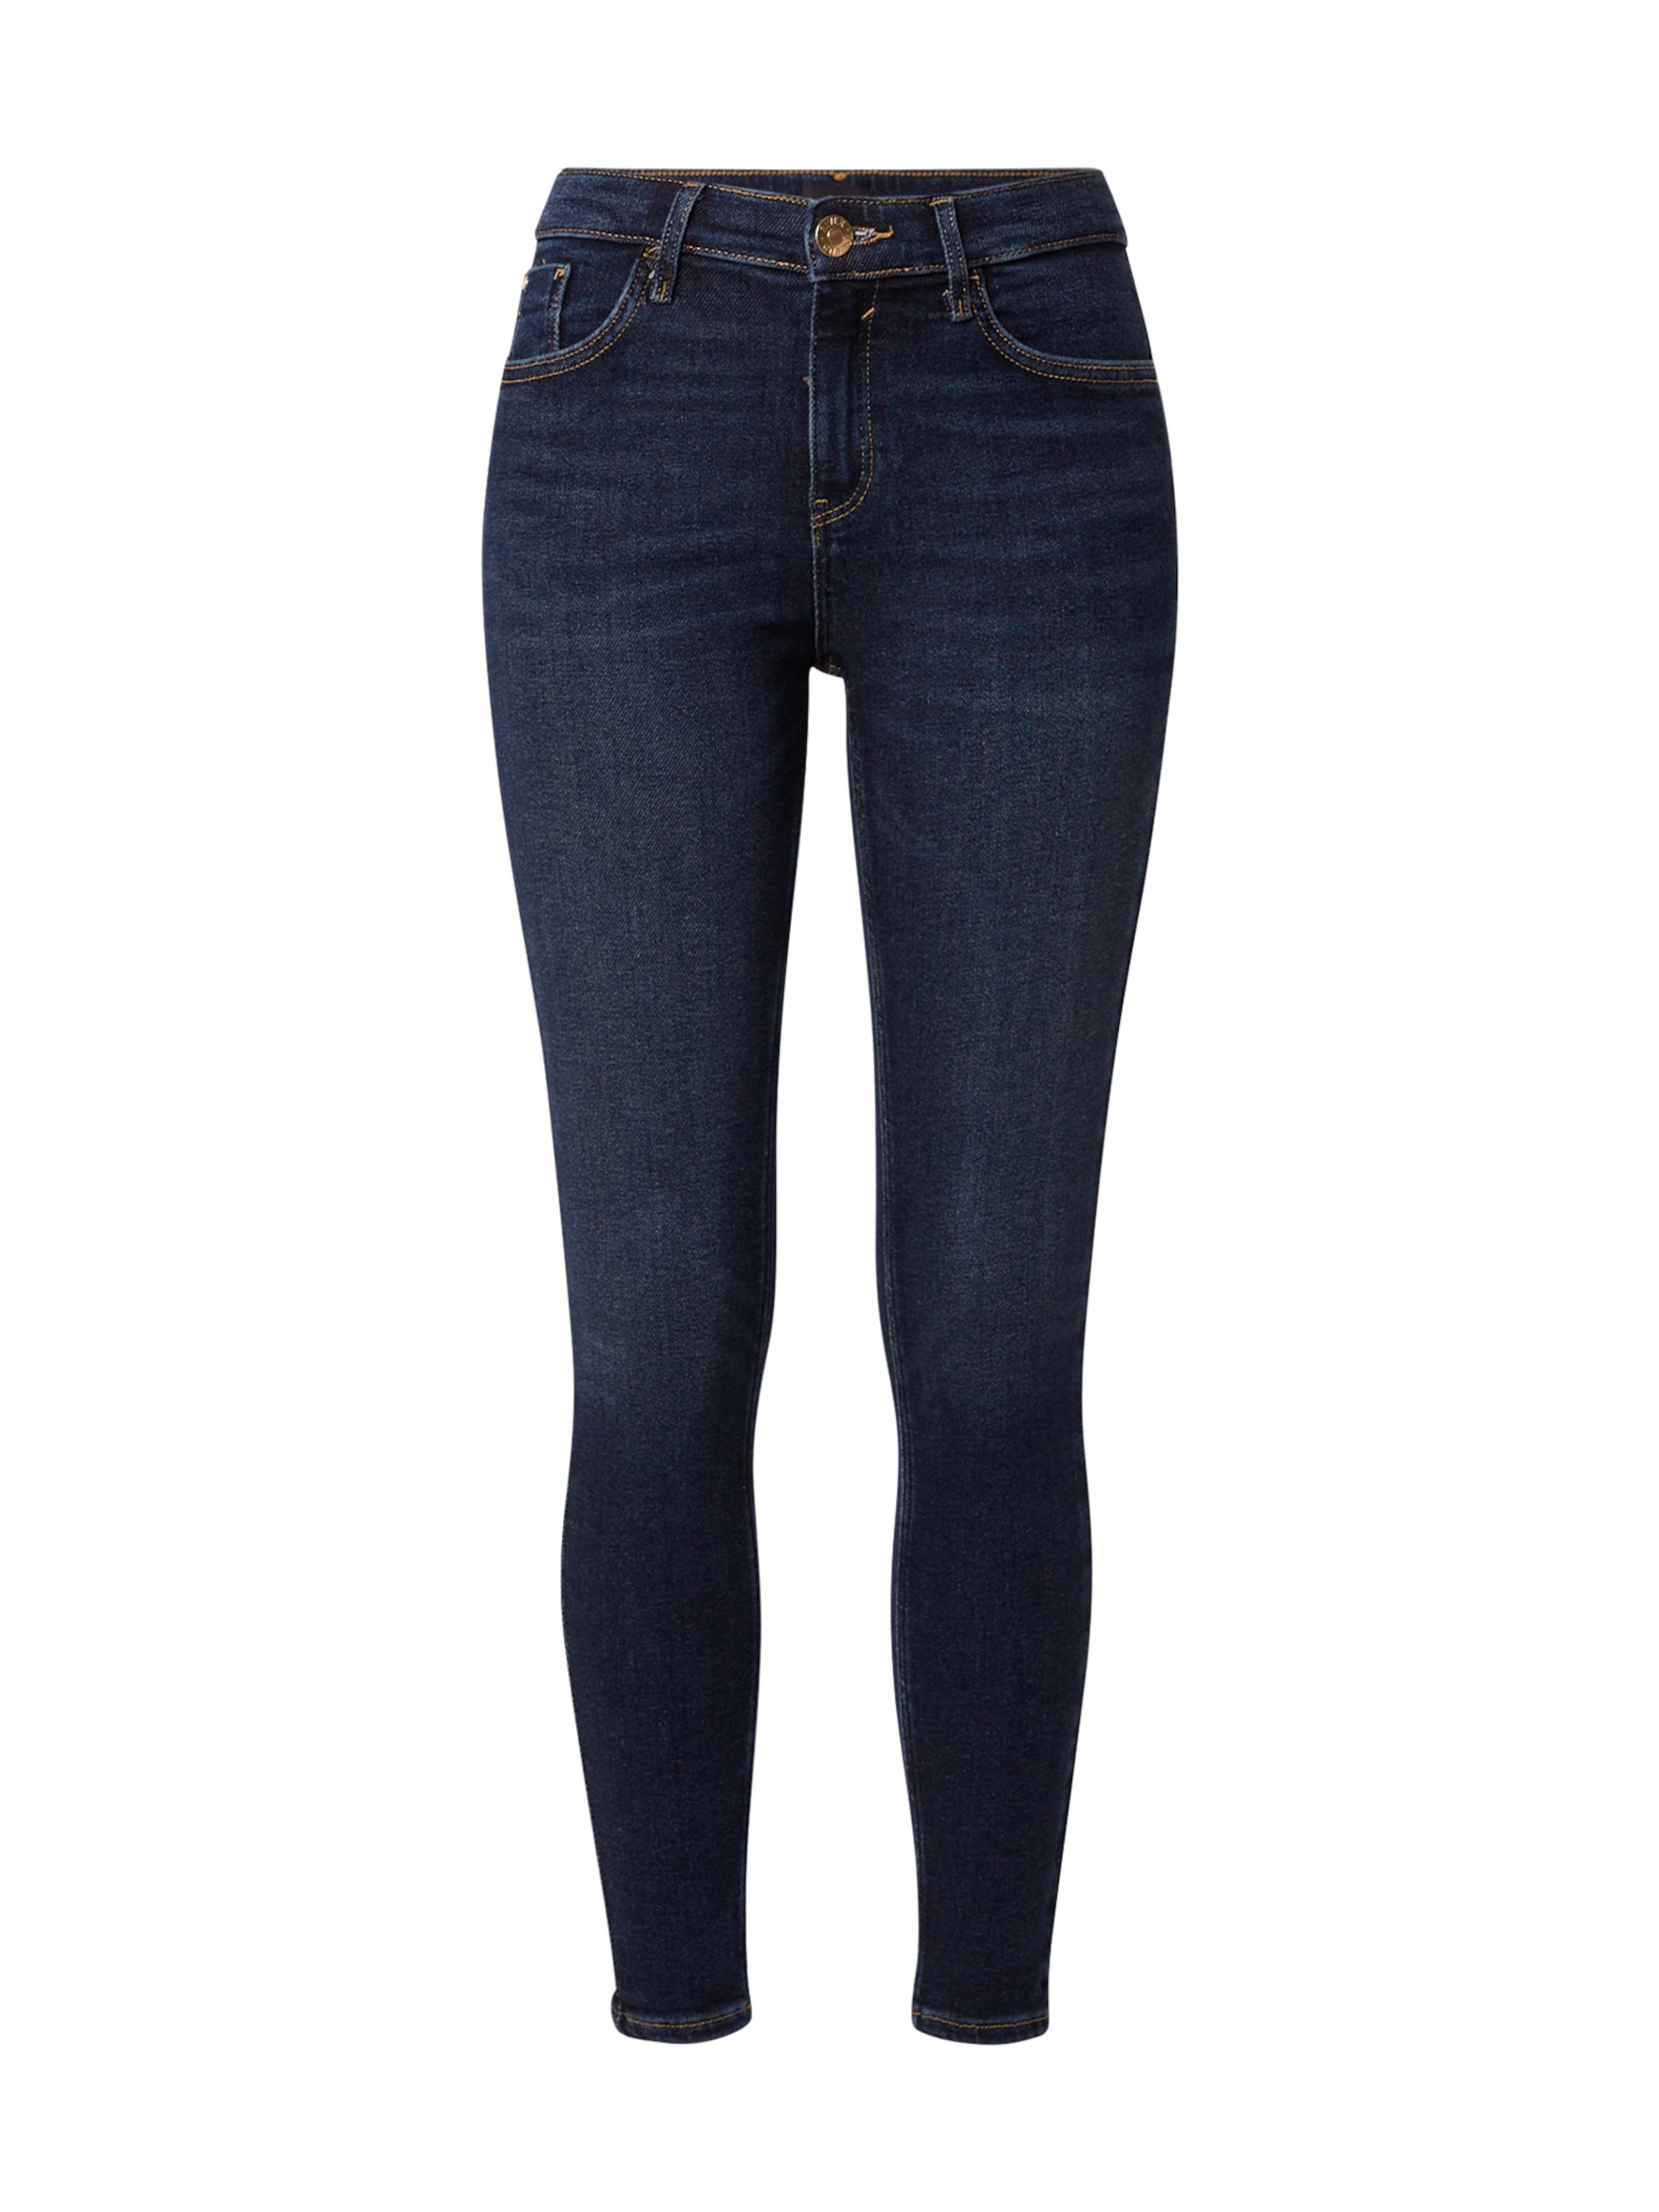 Y496J Donna River Island Jeans AMELIE in Blu Scuro 